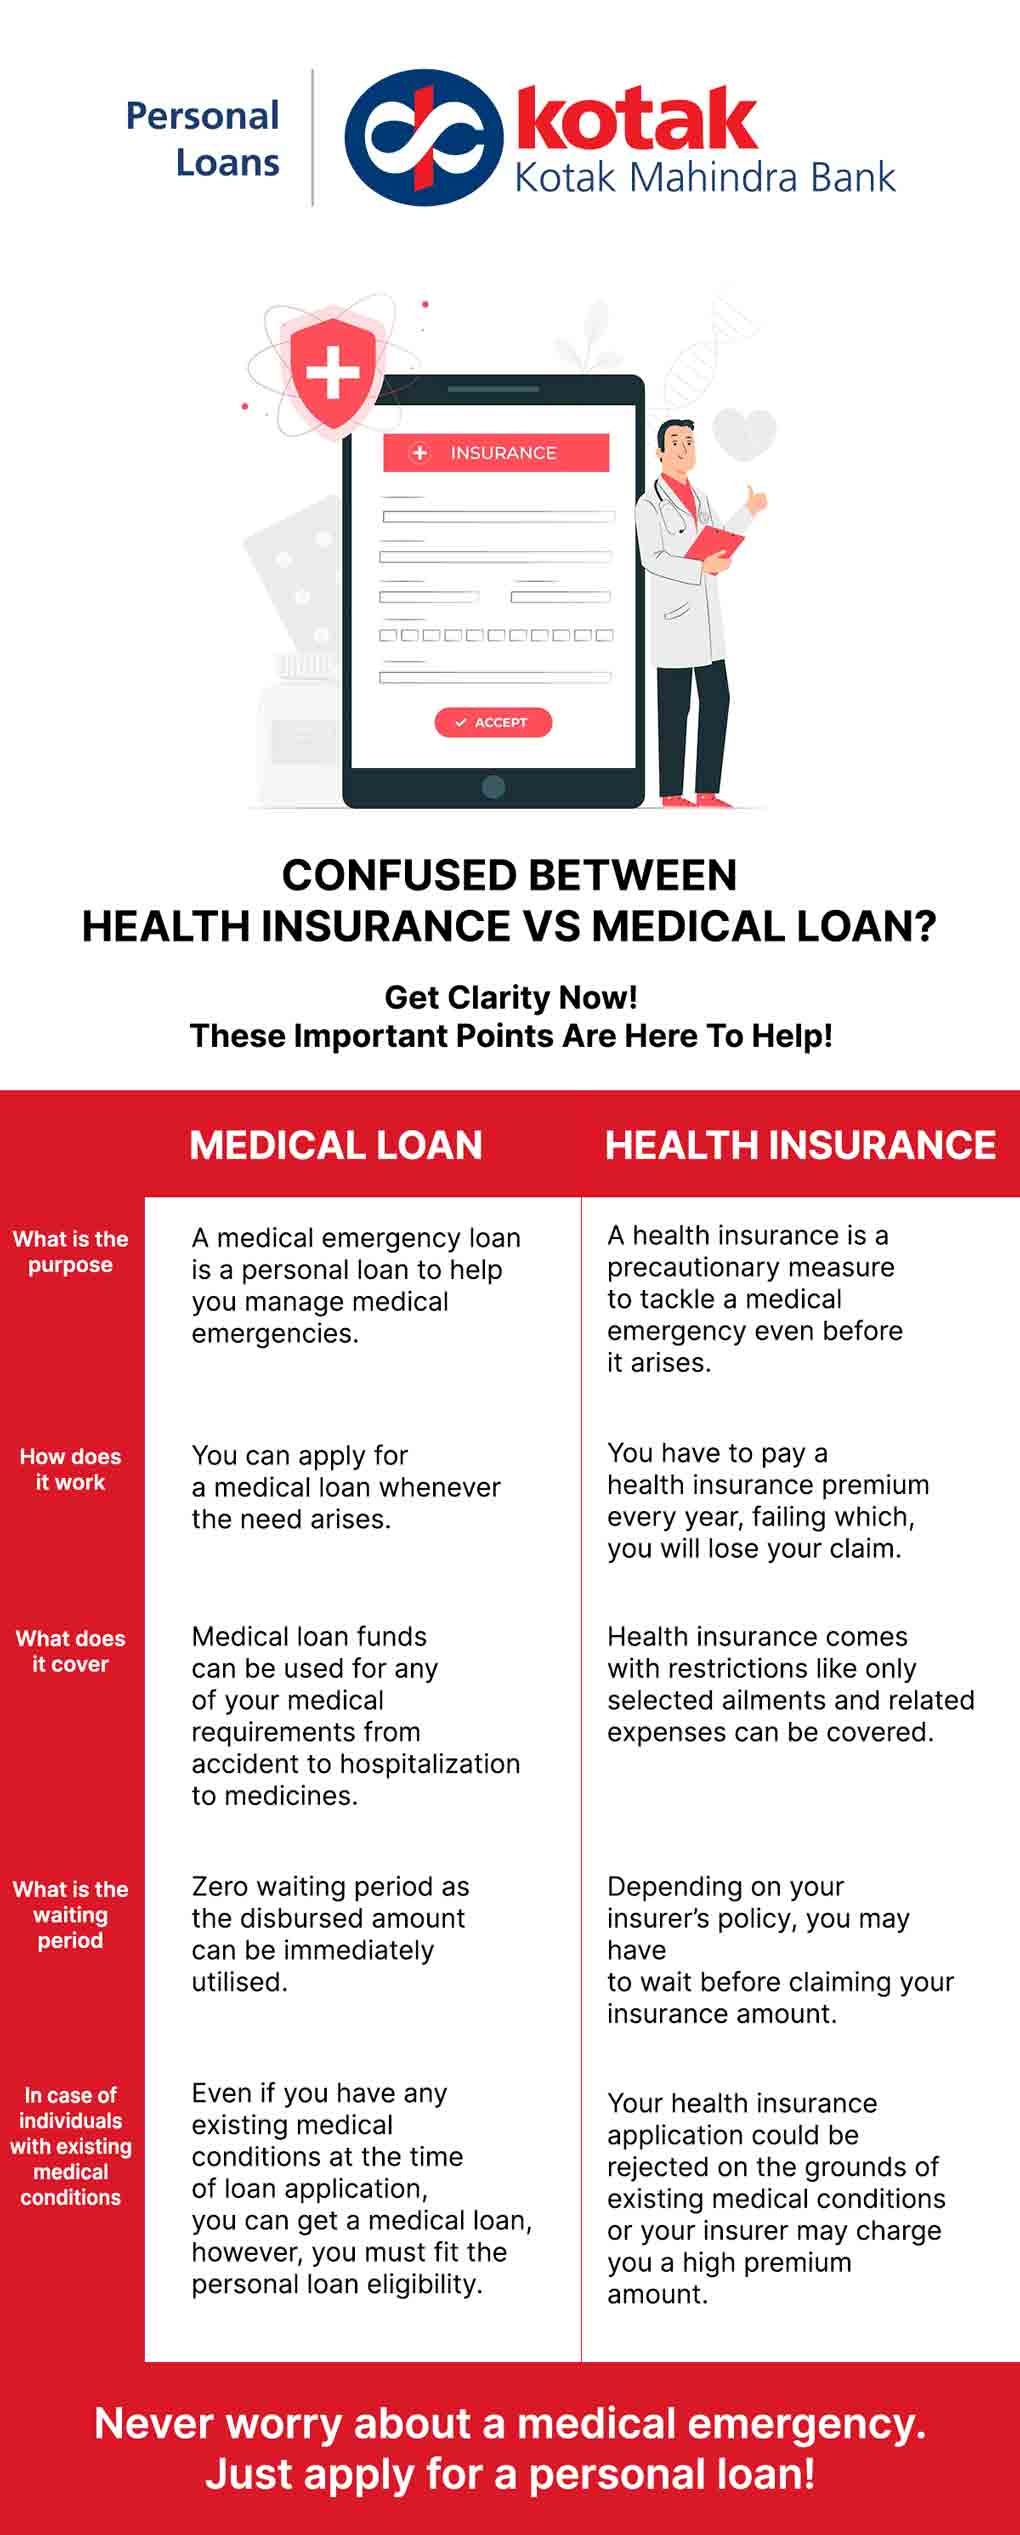 health-insurance-vs-medical-loan-know-the-difference-here.